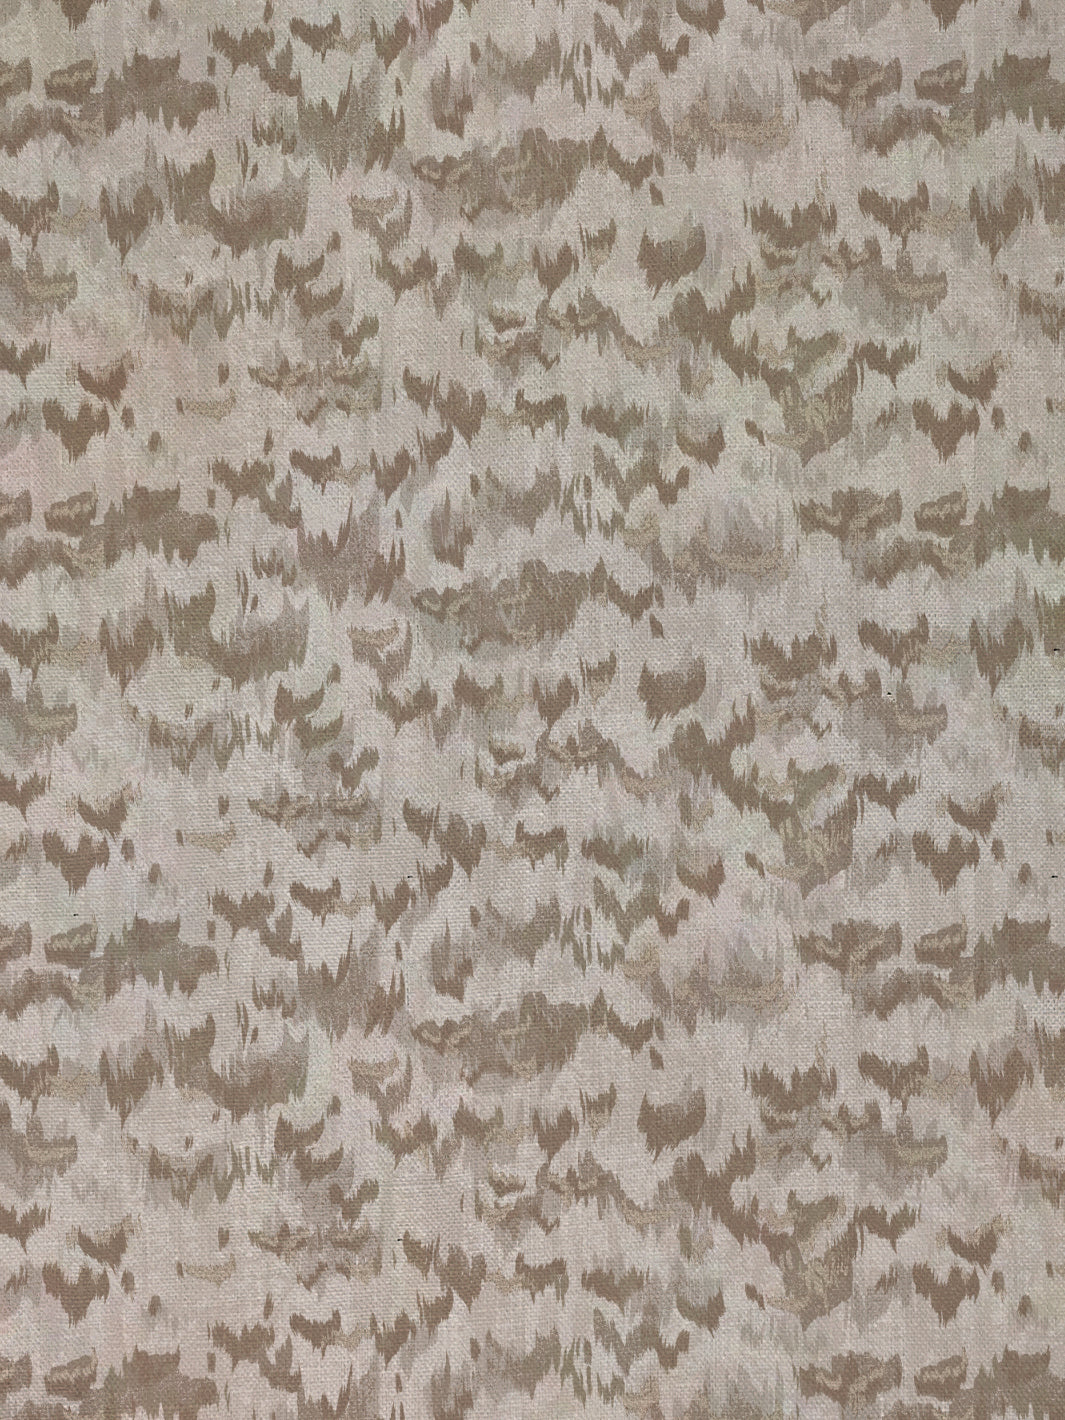 'Owl' Linen Fabric by Nathan Turner - Neutral